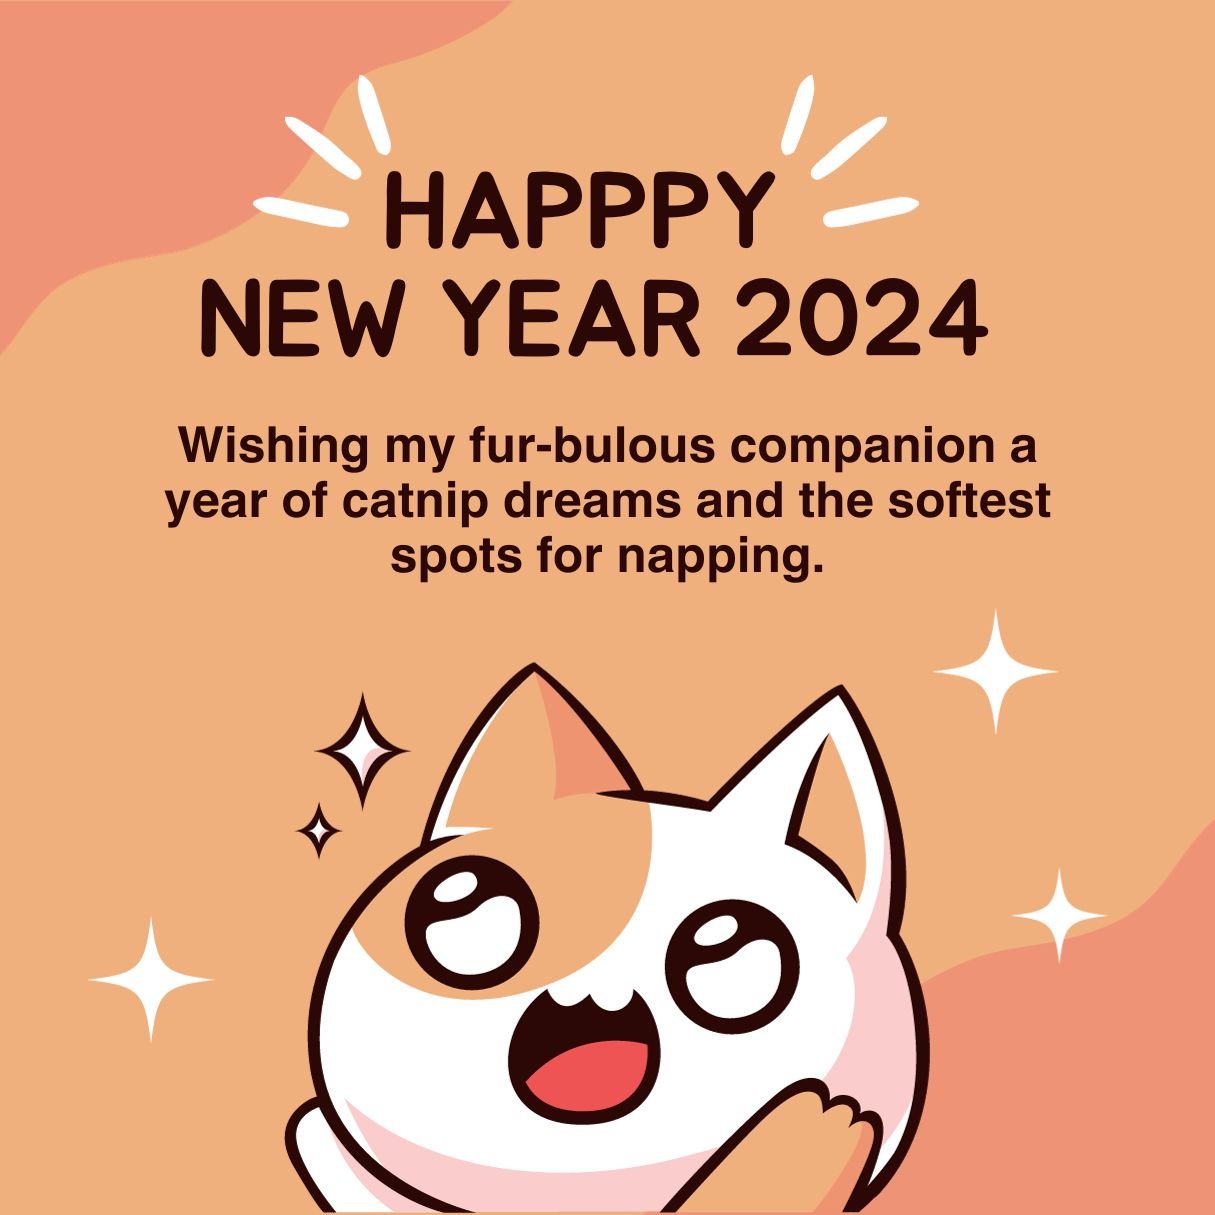 Happy New Year Wishes 2024 For Cats Image Download